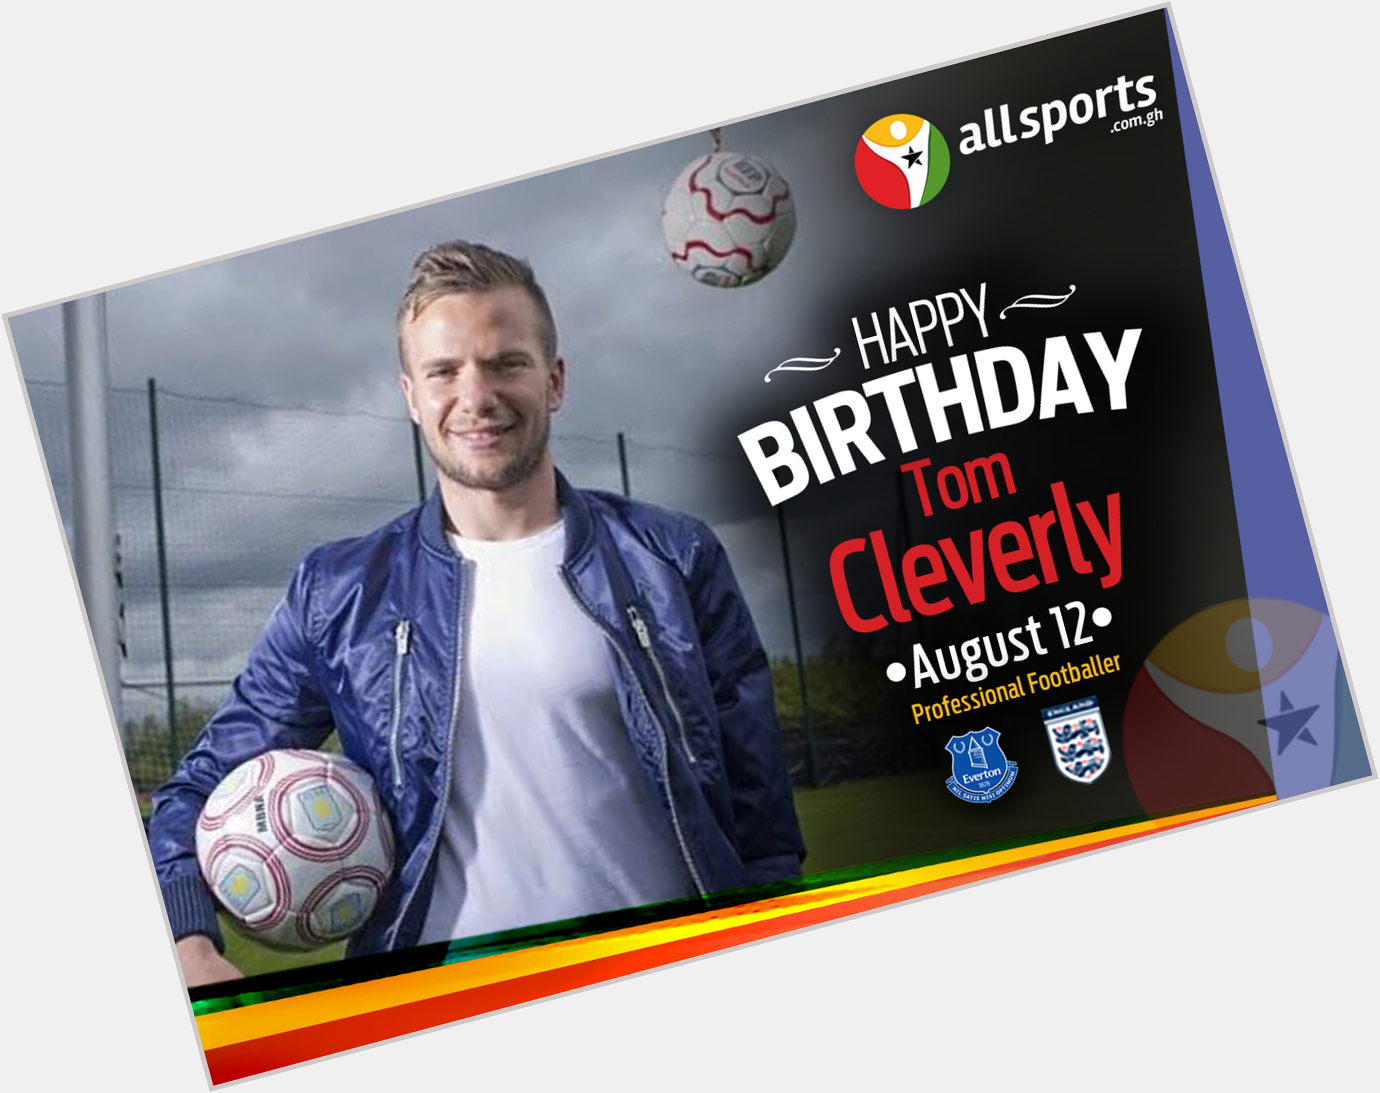 AllSportsGh wishes and English midfielder Tom Cleverley a HAPPY BIRTHDAY as he turns 26 today. 